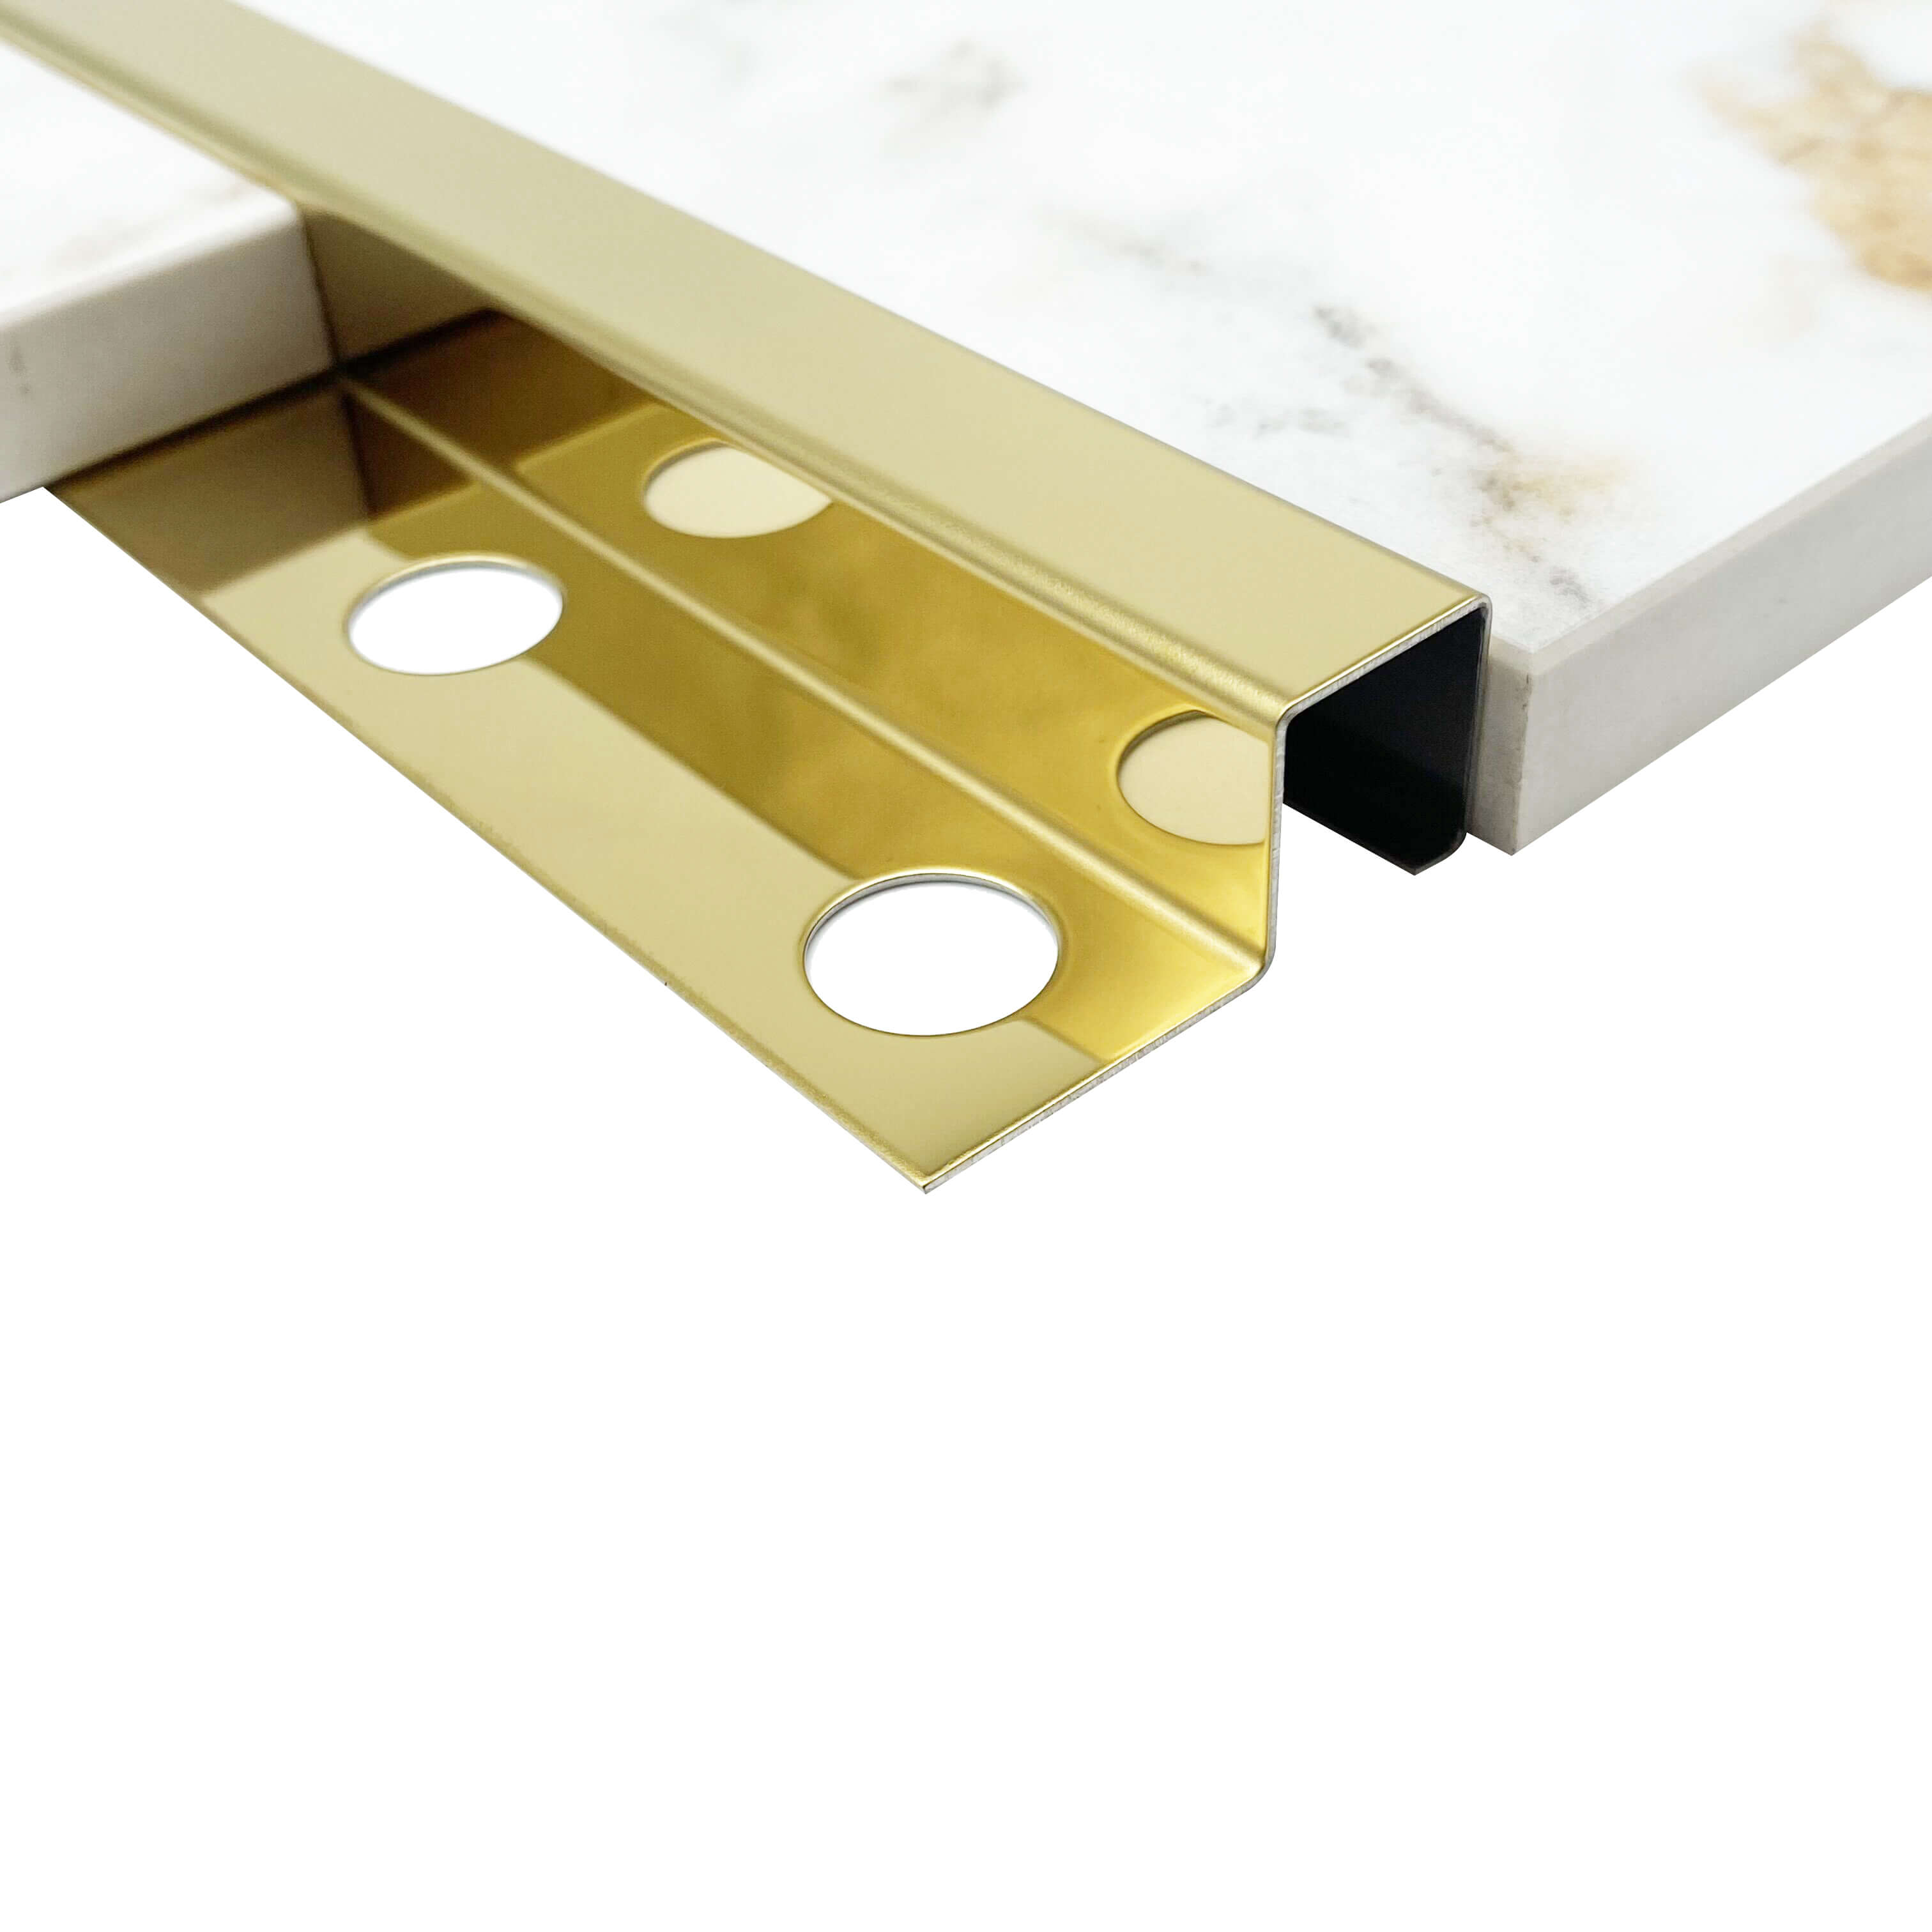 WF12x12x23GDMI-Square shape stainless steel tile trim gold mirror